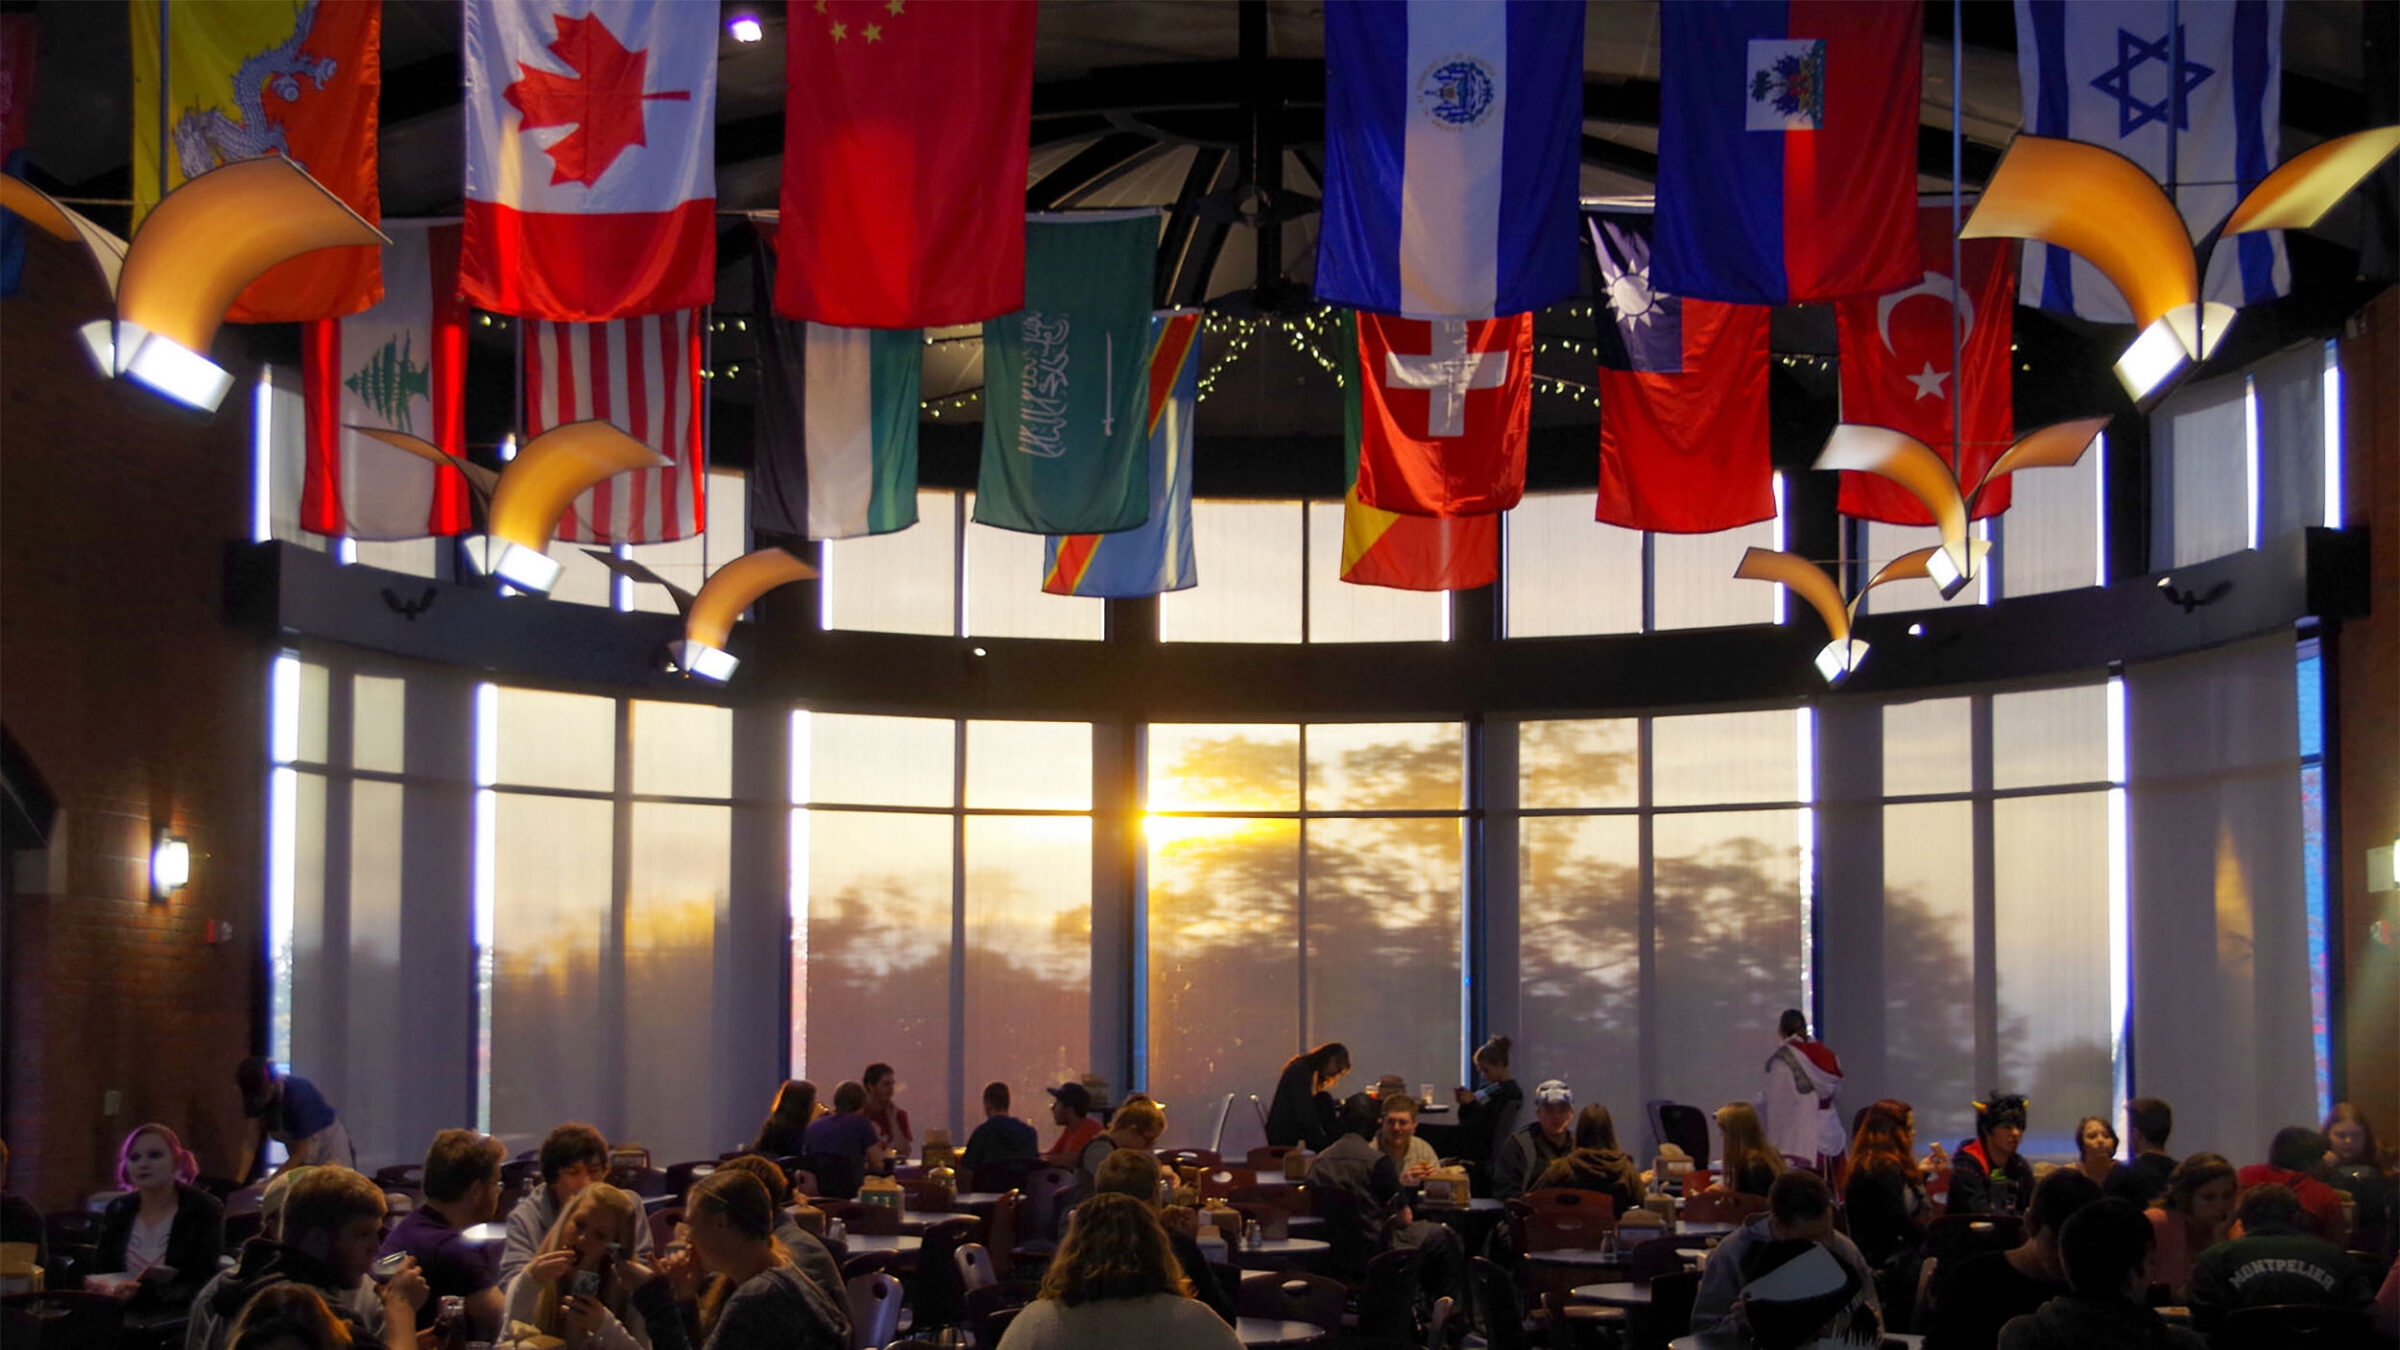 multicultural flags hang above the lively dining hall during sunset